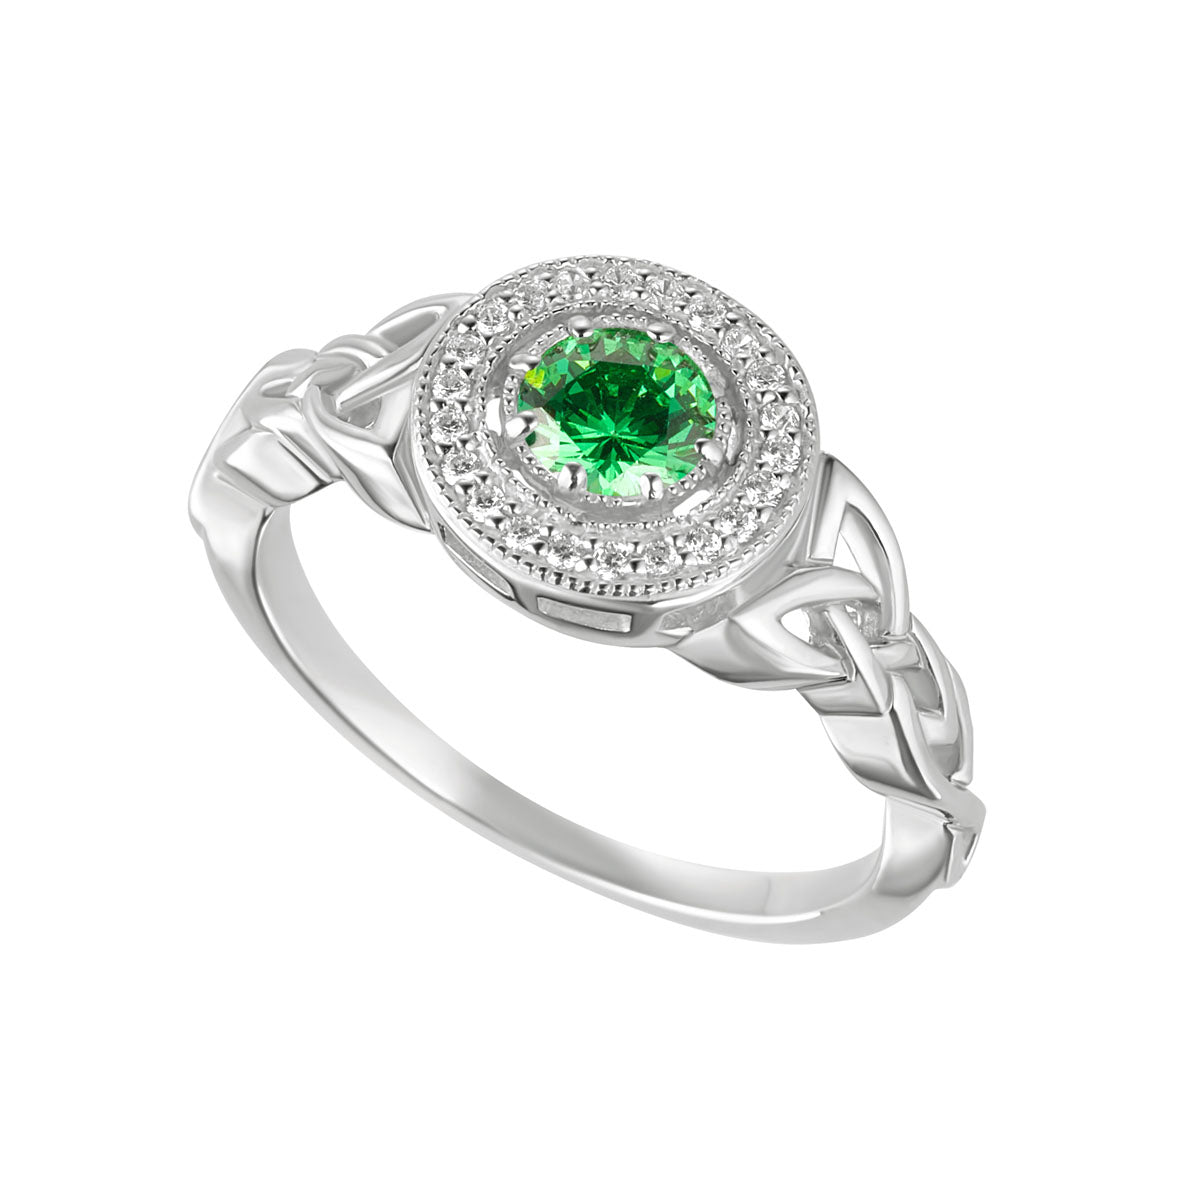 Sterling Silver Cluster Green CZ Trinity Knot Ring S21134 from Solvar Irish Jewellery